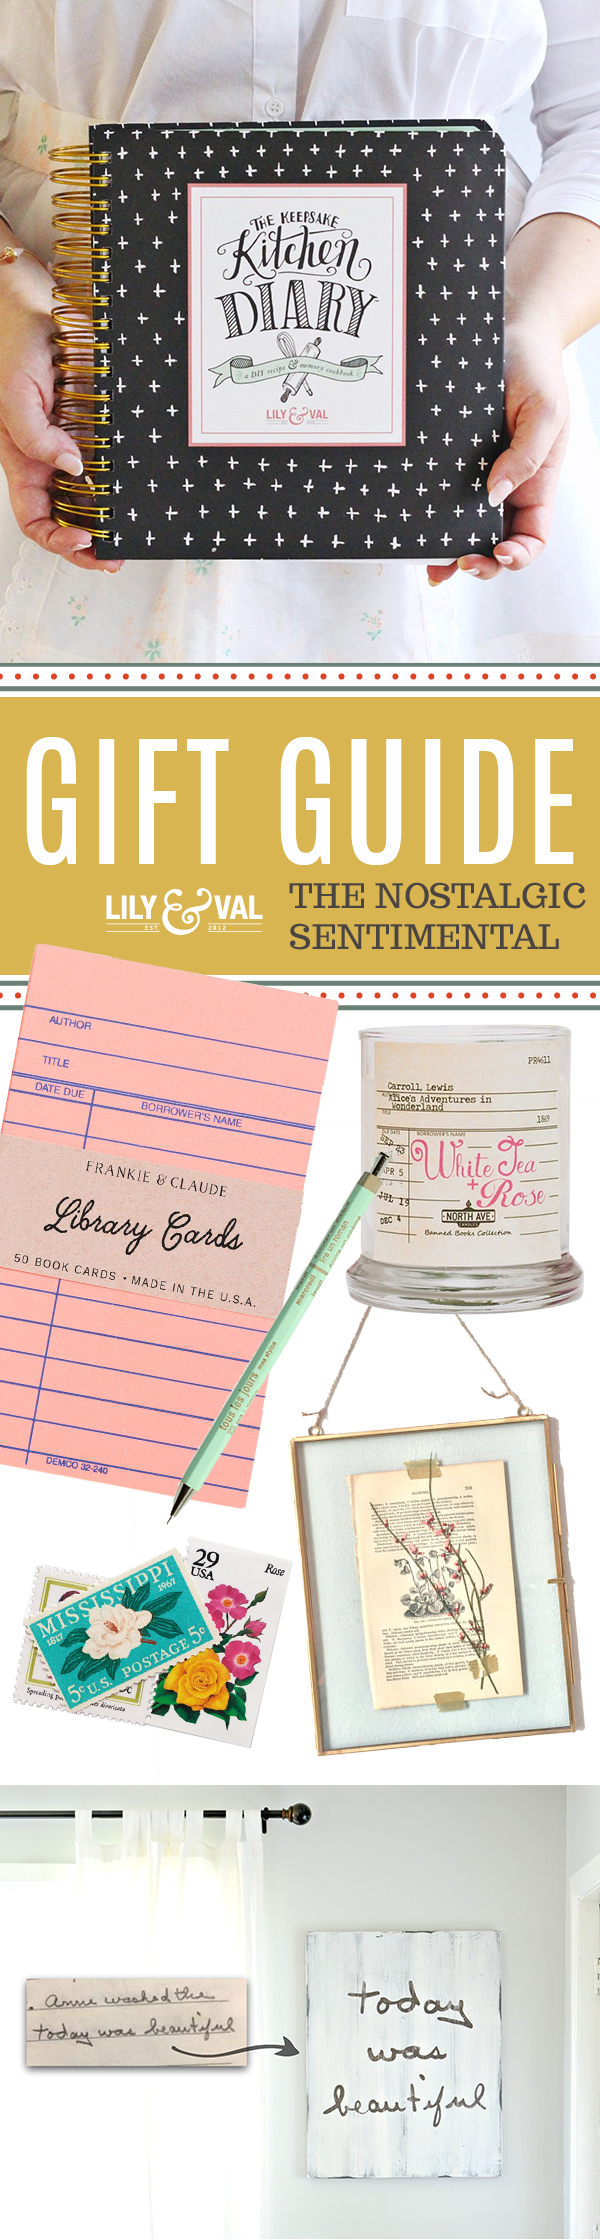 Lily & Val Gift Guide for the Nostalgic Sentimental 